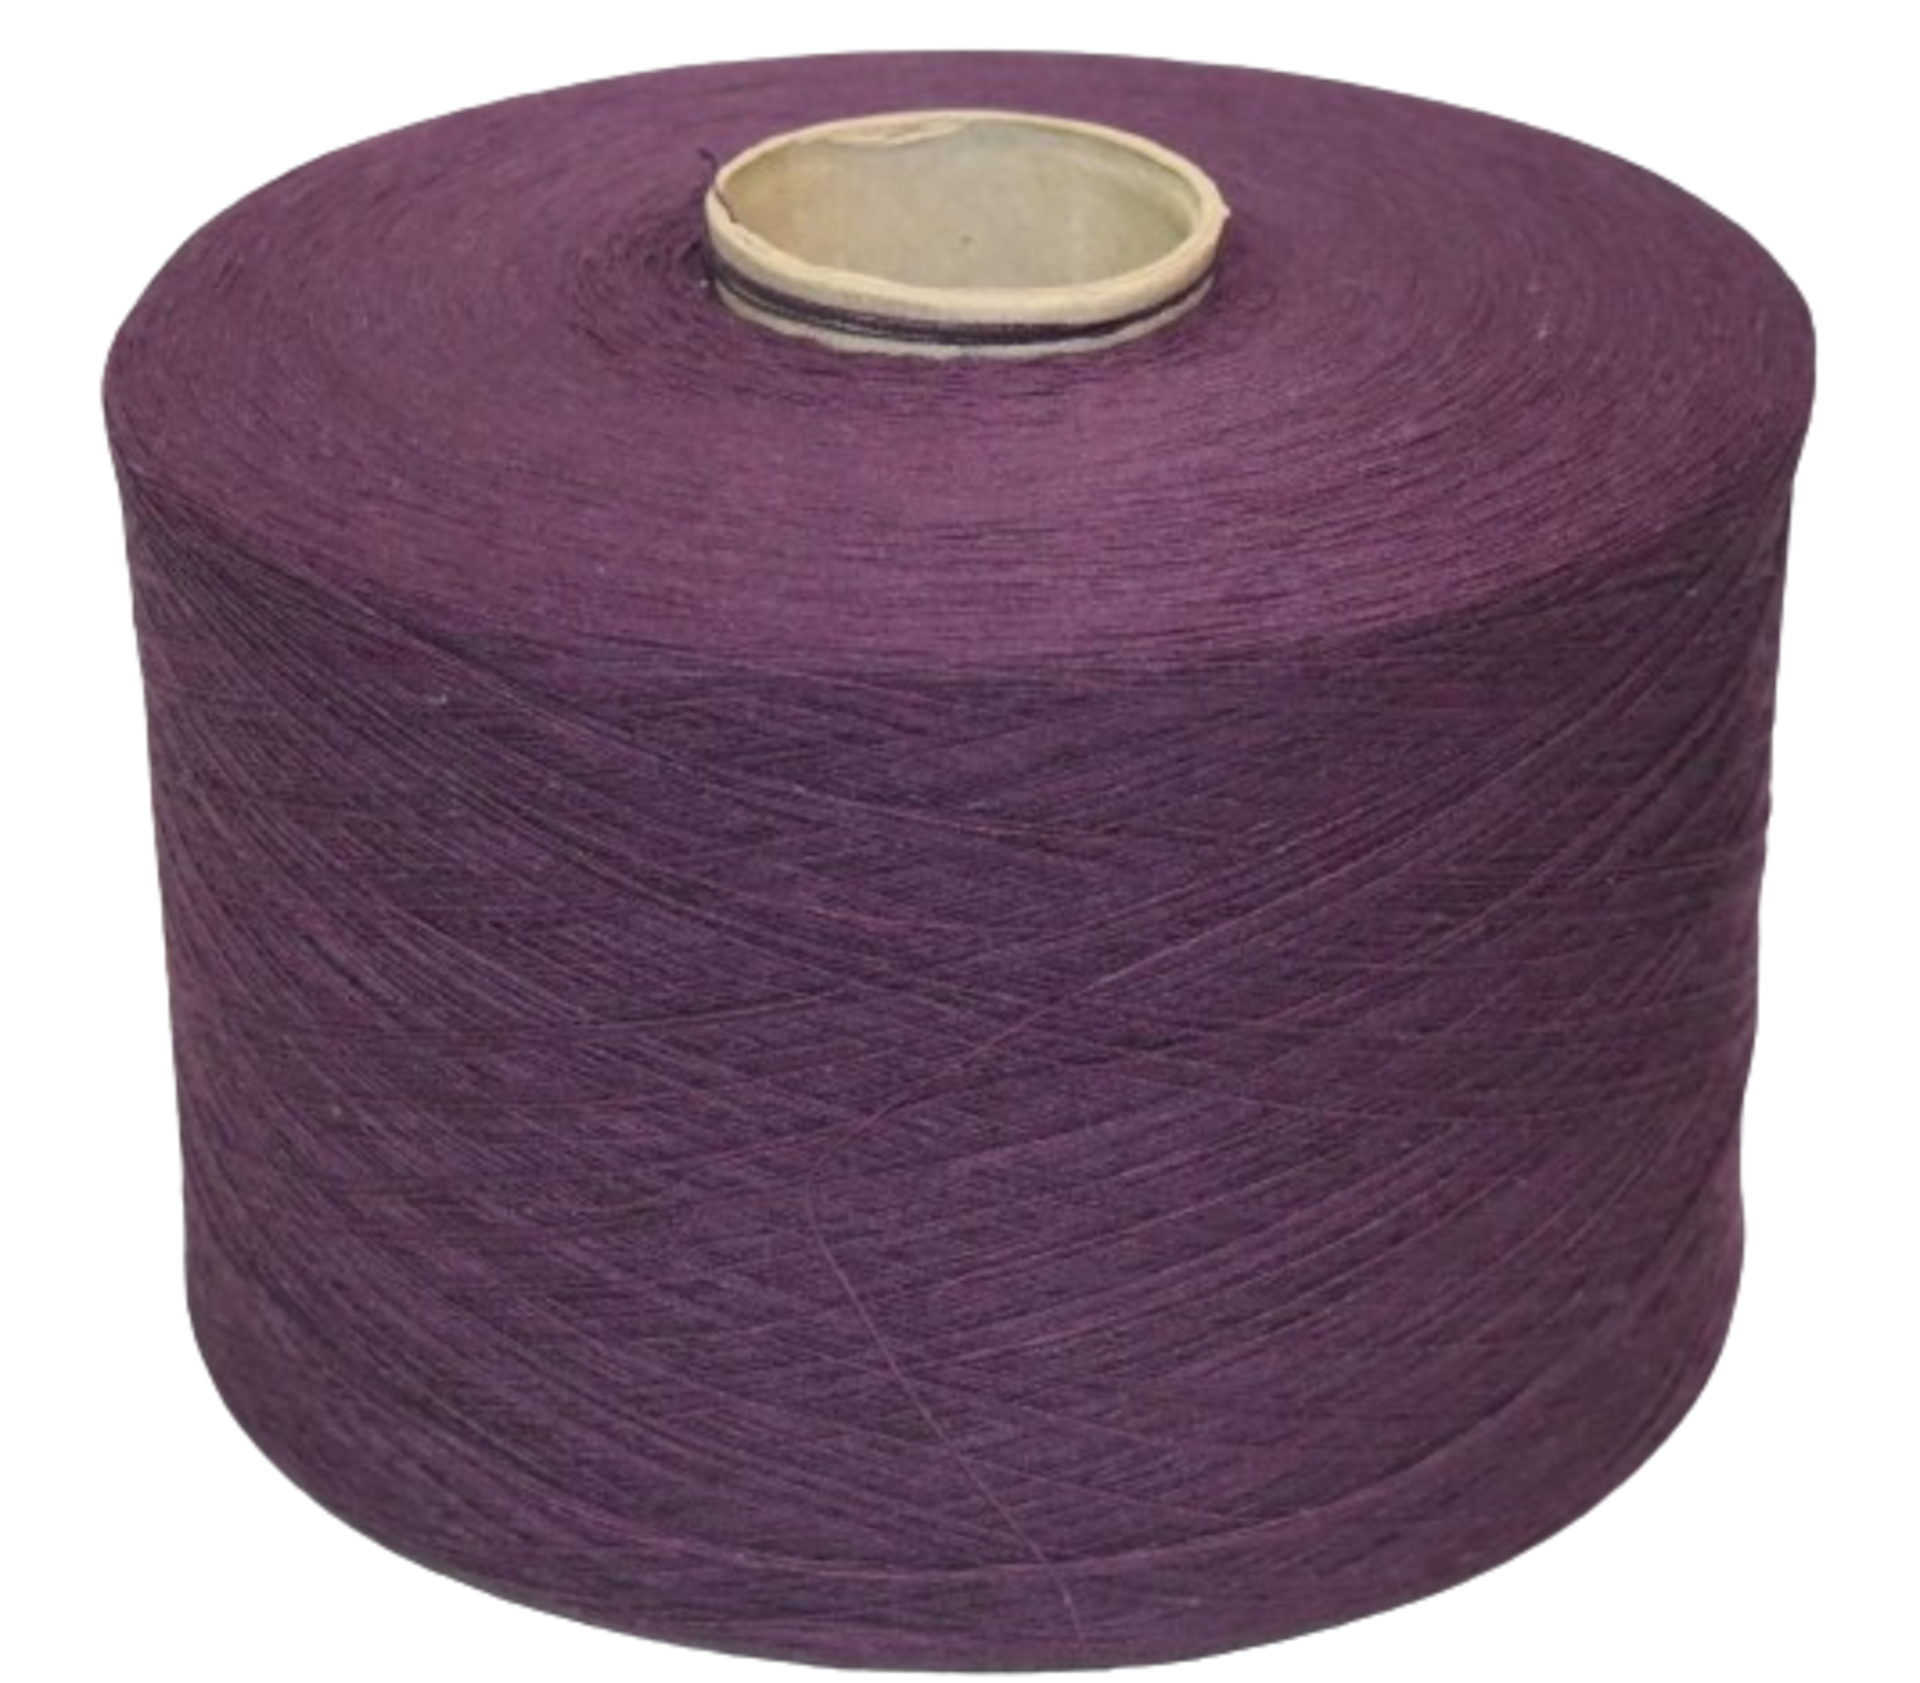 6 x Cones of 1/13 MicroCotton Knitting Yarn - Purple - Approx Weight: 2,300g - New Stock ABL Yarn - Image 3 of 15